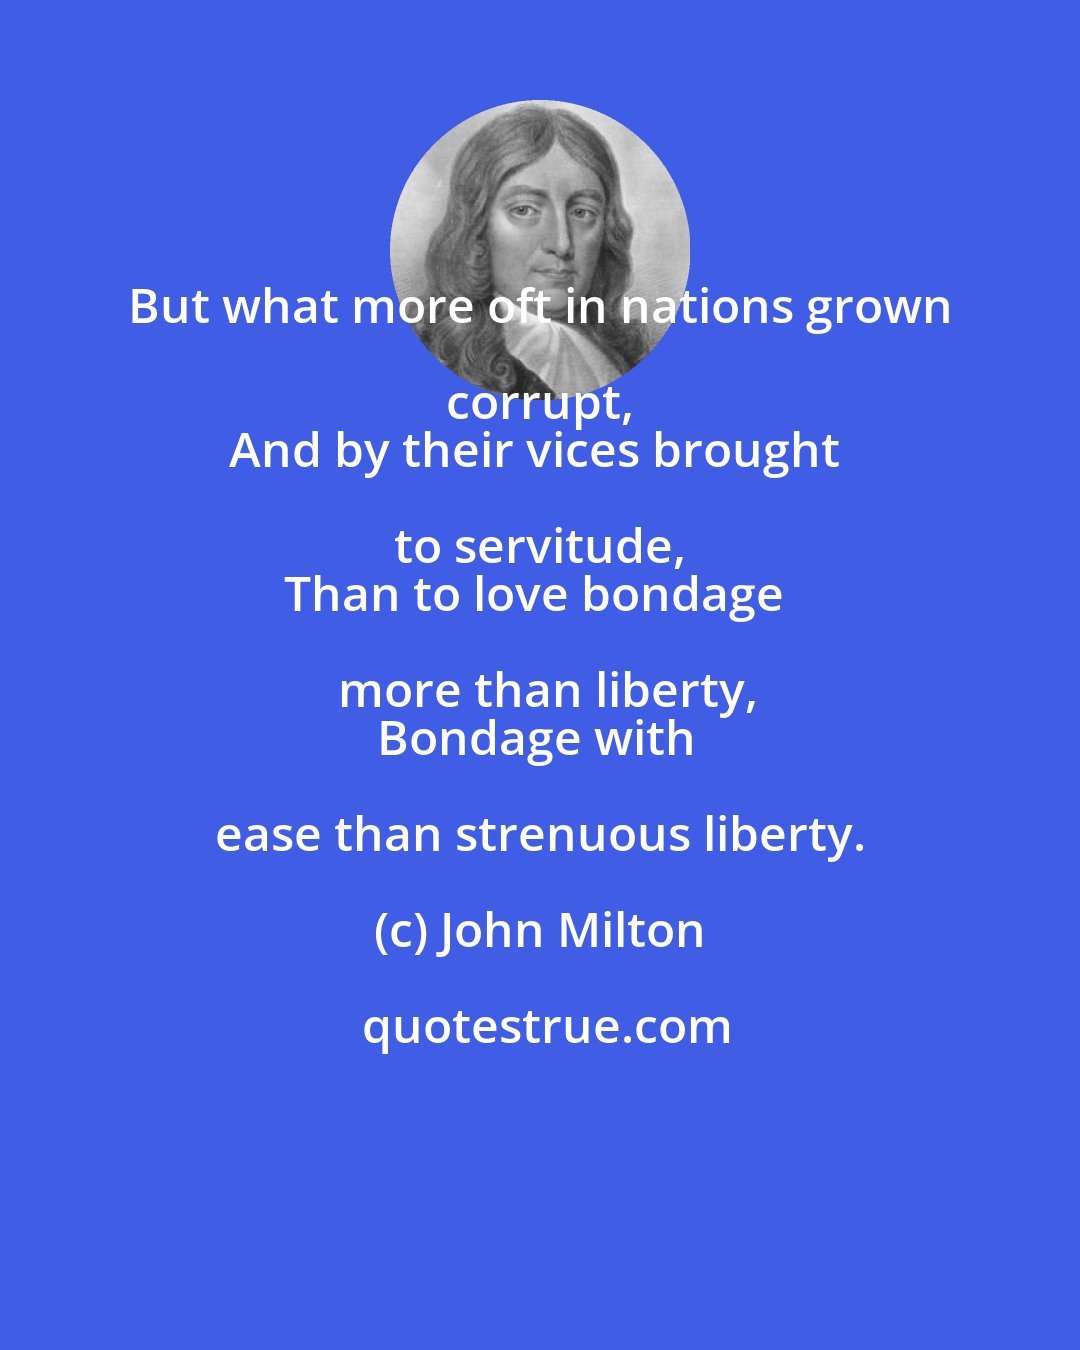 John Milton: But what more oft in nations grown corrupt, 
And by their vices brought to servitude, 
Than to love bondage more than liberty,
Bondage with ease than strenuous liberty.